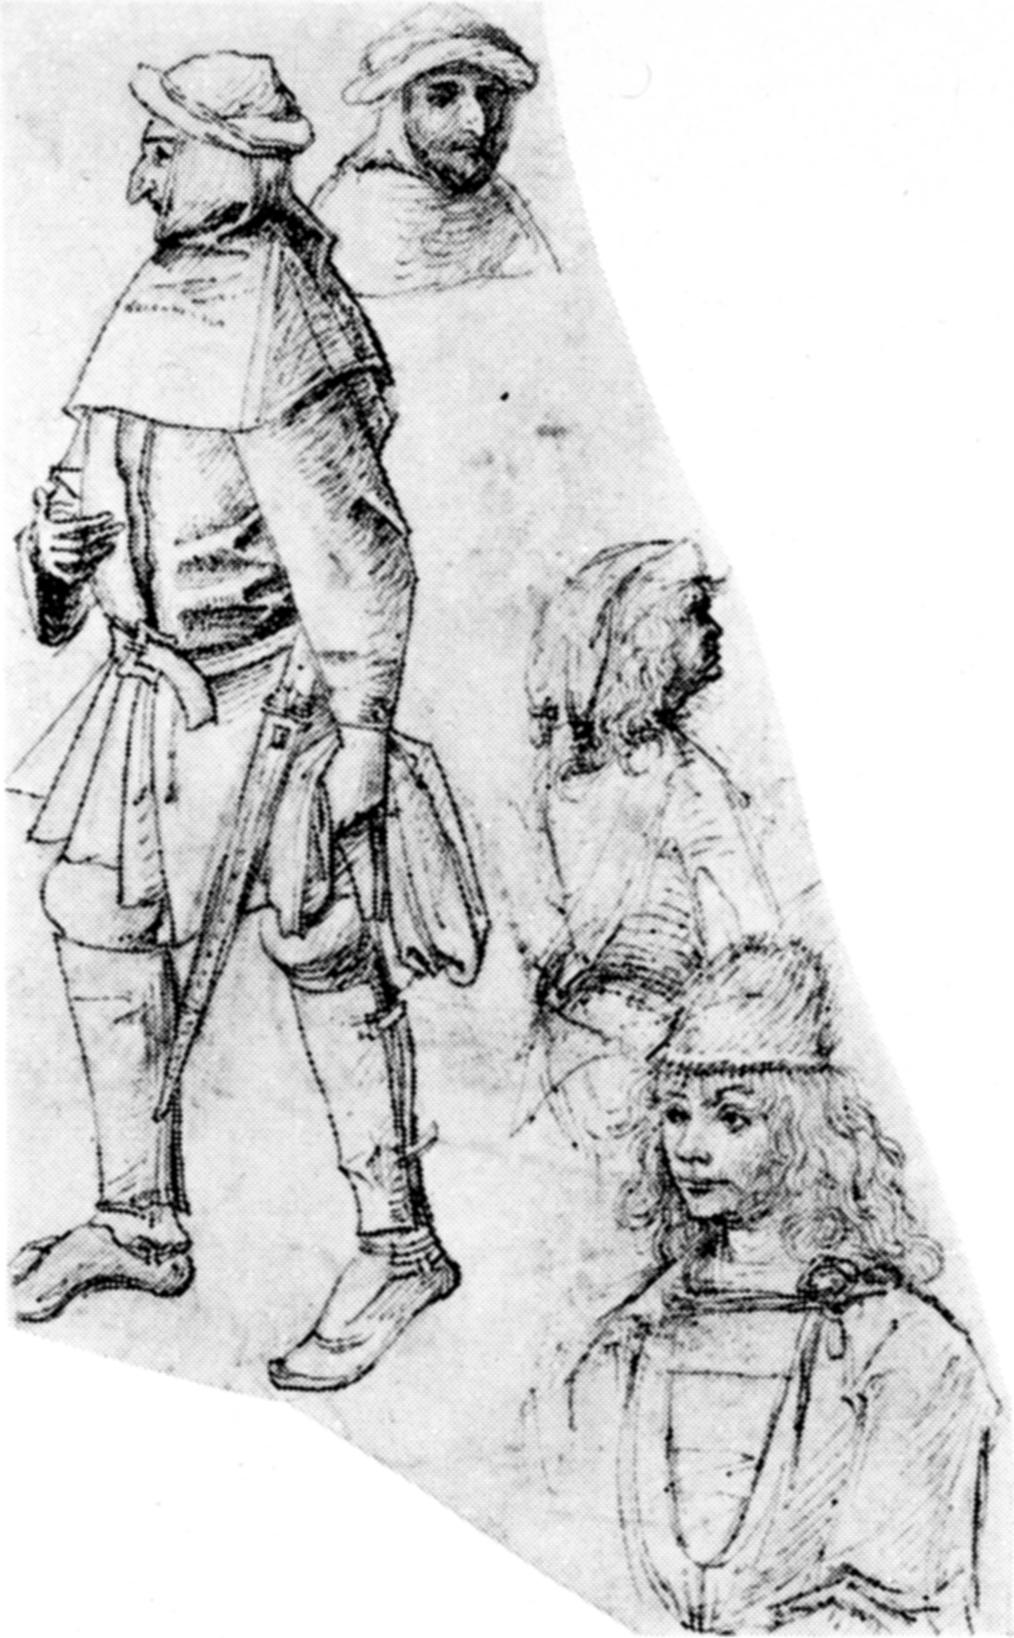 A peasant and three bustlength figures (1515).